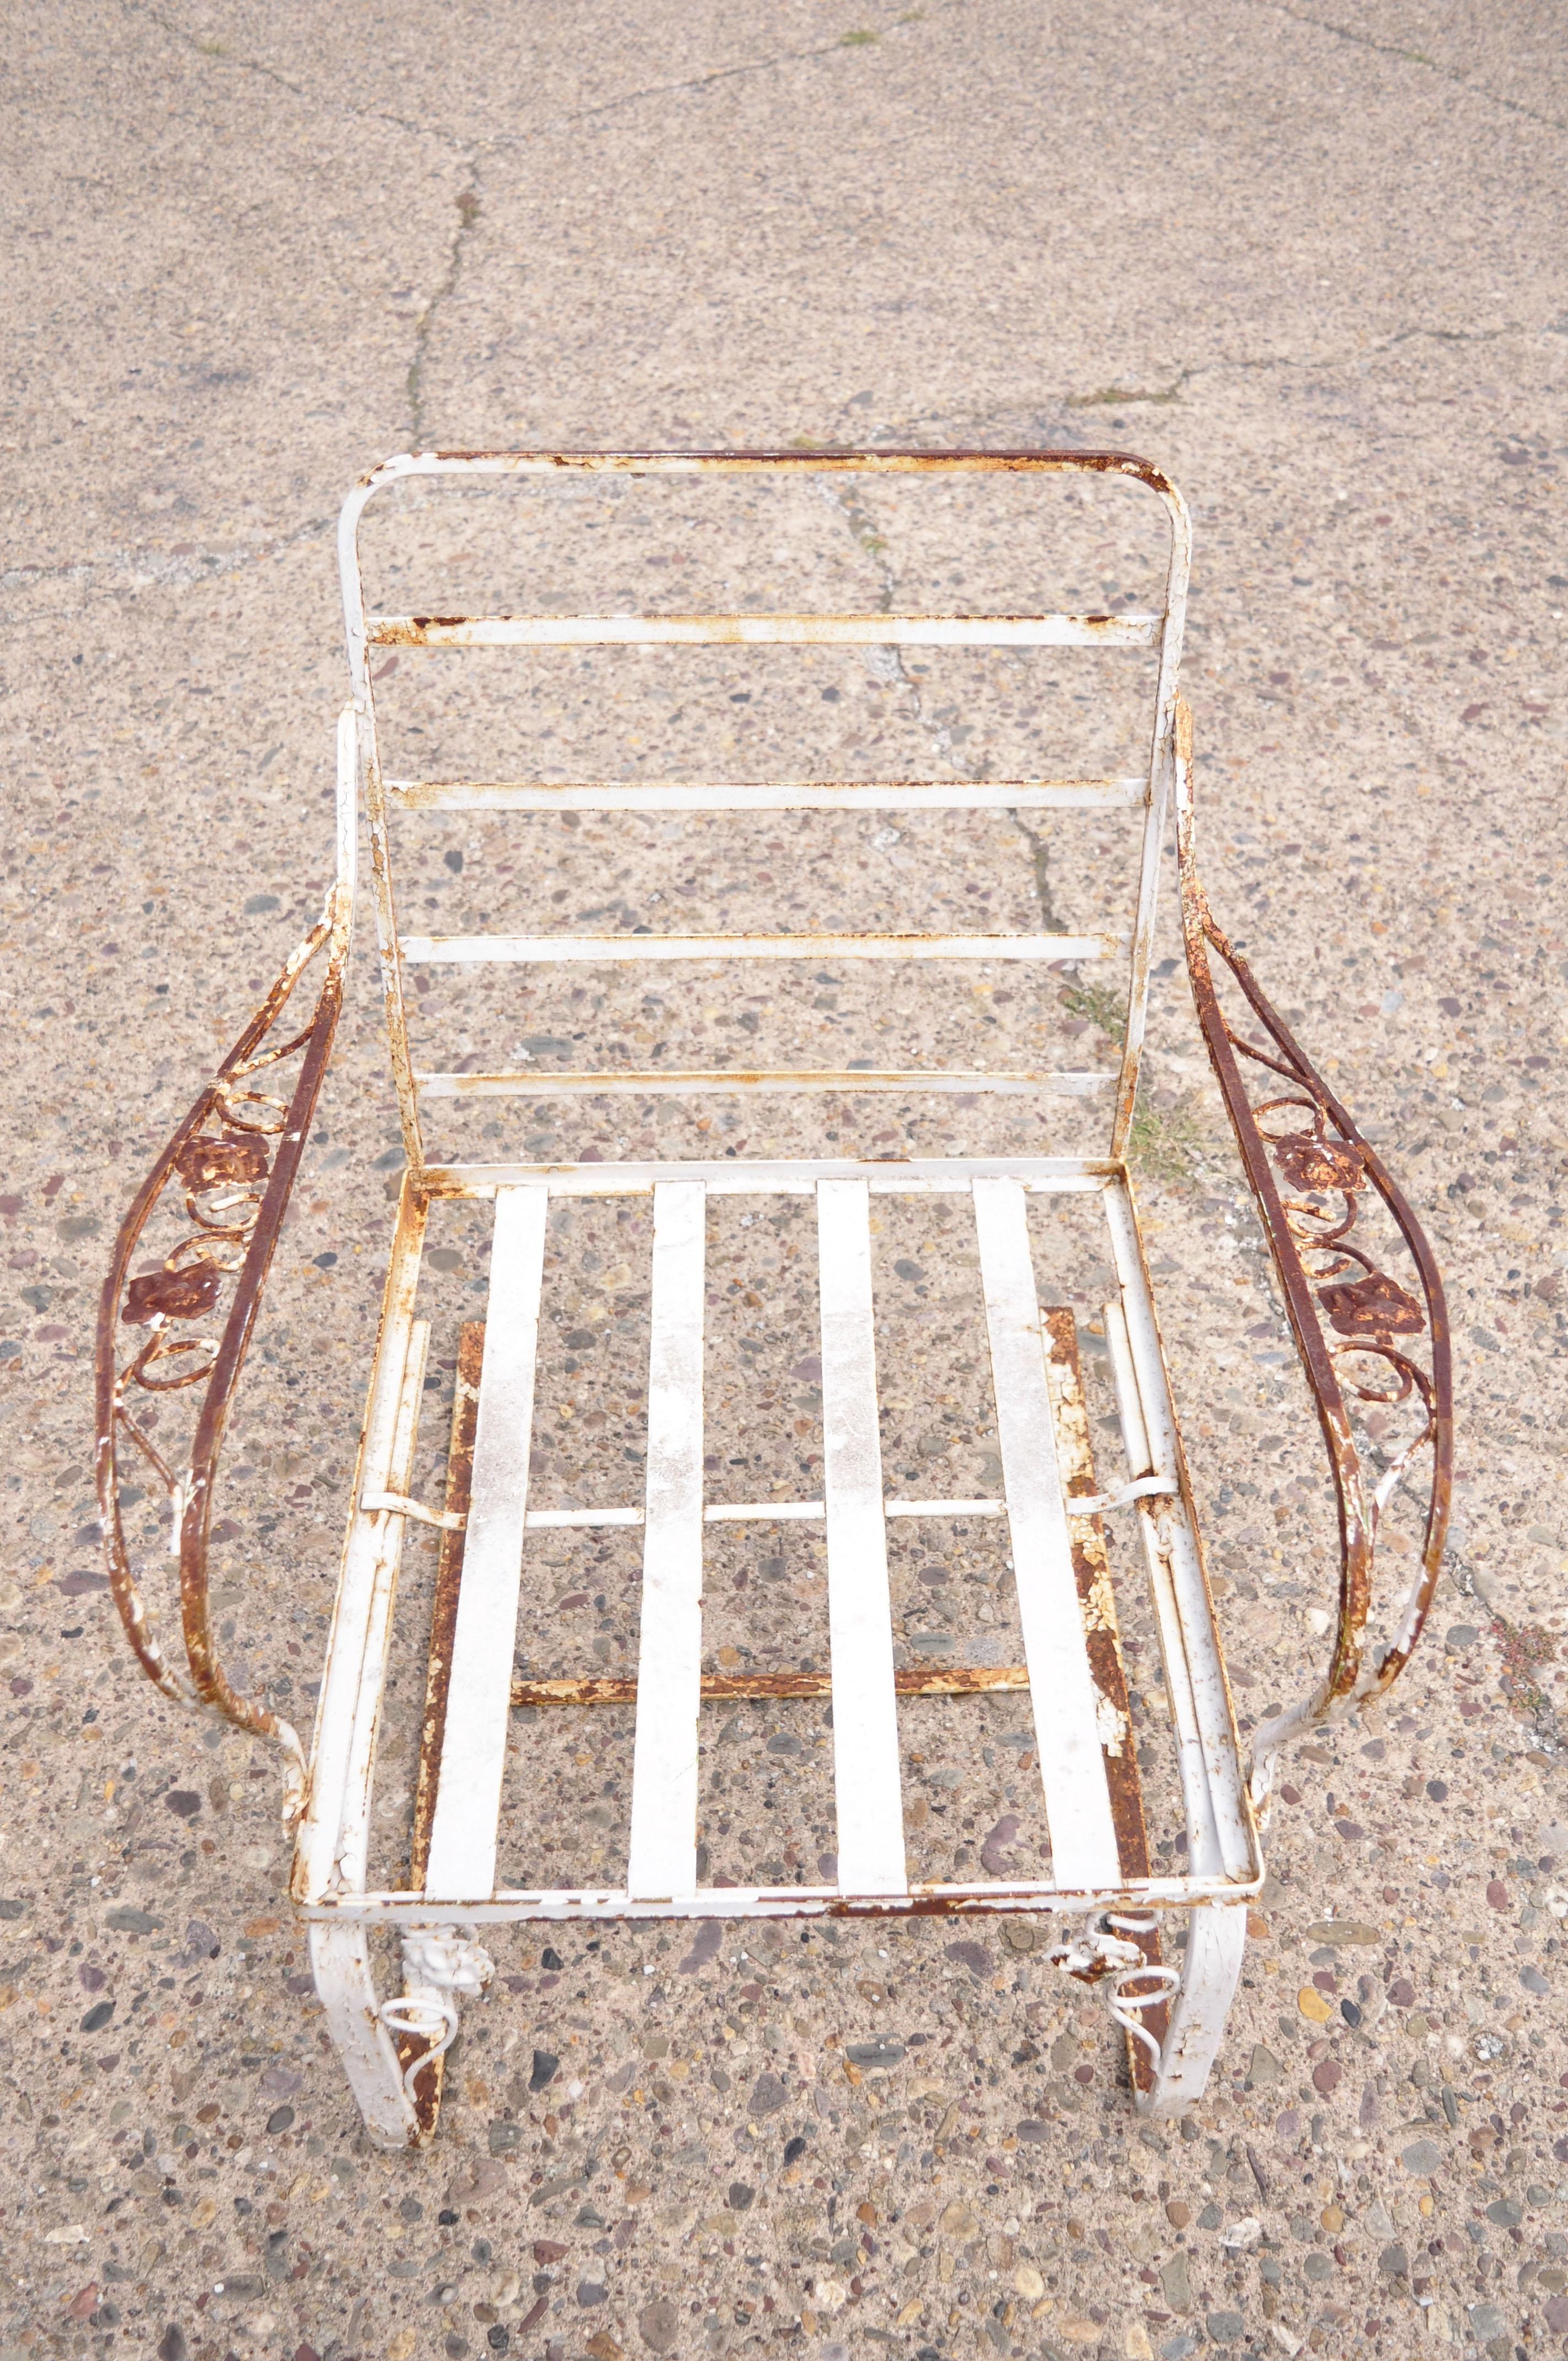 Vintage Woodard Chantilly Rose Wrought Iron Garden Patio Bouncer Lounge Chair. Item features spring/bouncer frame, classic Chantilly Rose pattern, wrought iron construction, quality American craftsmanship, great style and form. Circa Mid to Late